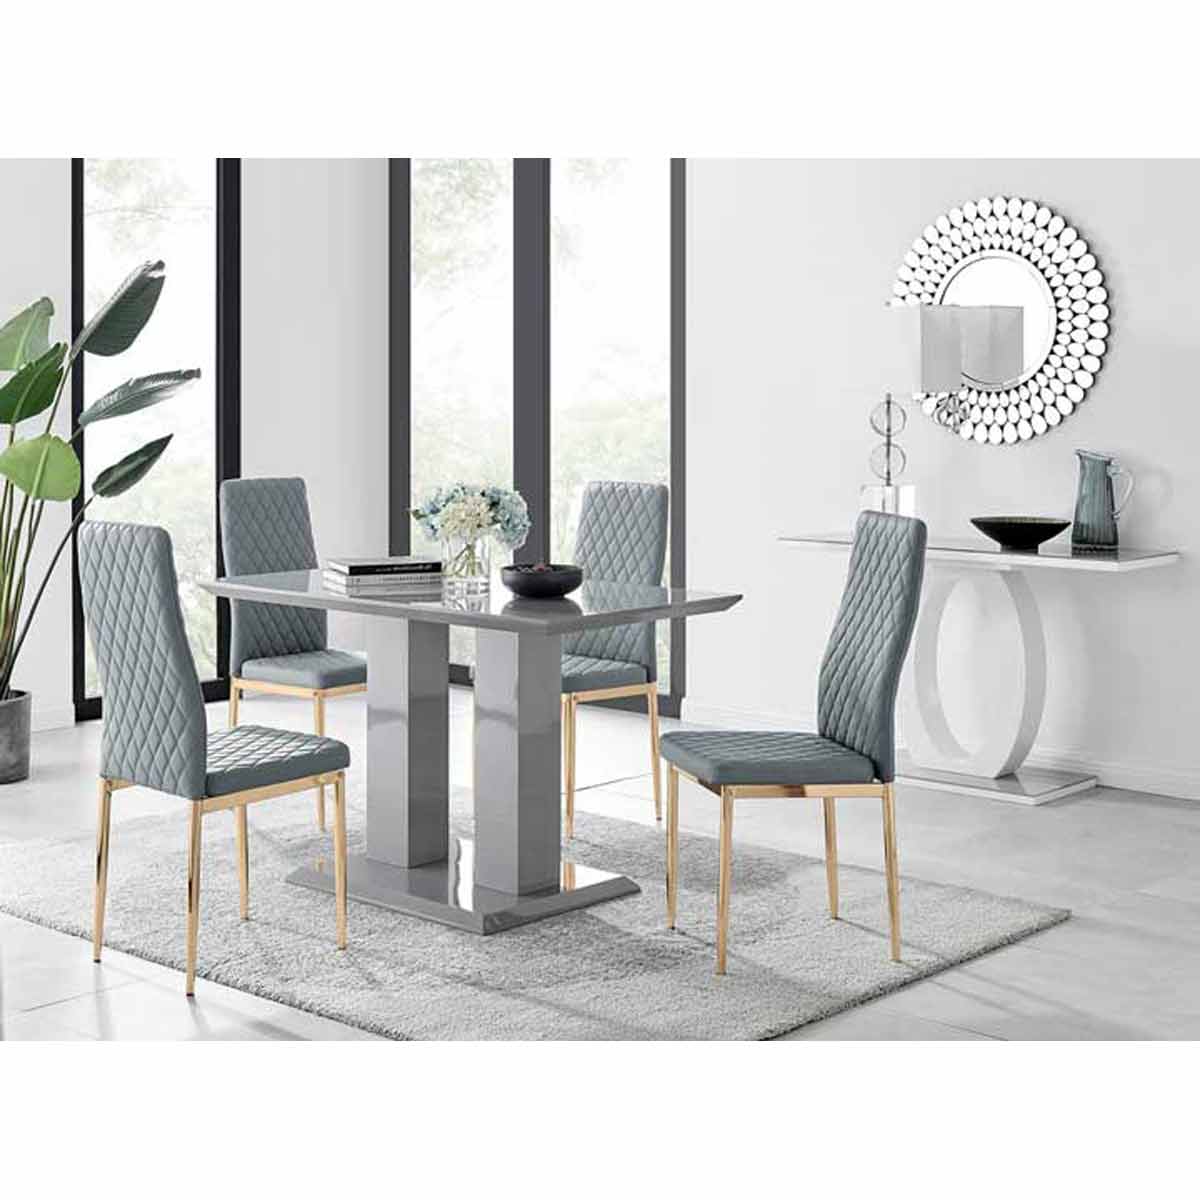 Furniture Box Imperia 4 Seater Grey Dining Table and 4 x Grey Gold Leg Milan Chairs